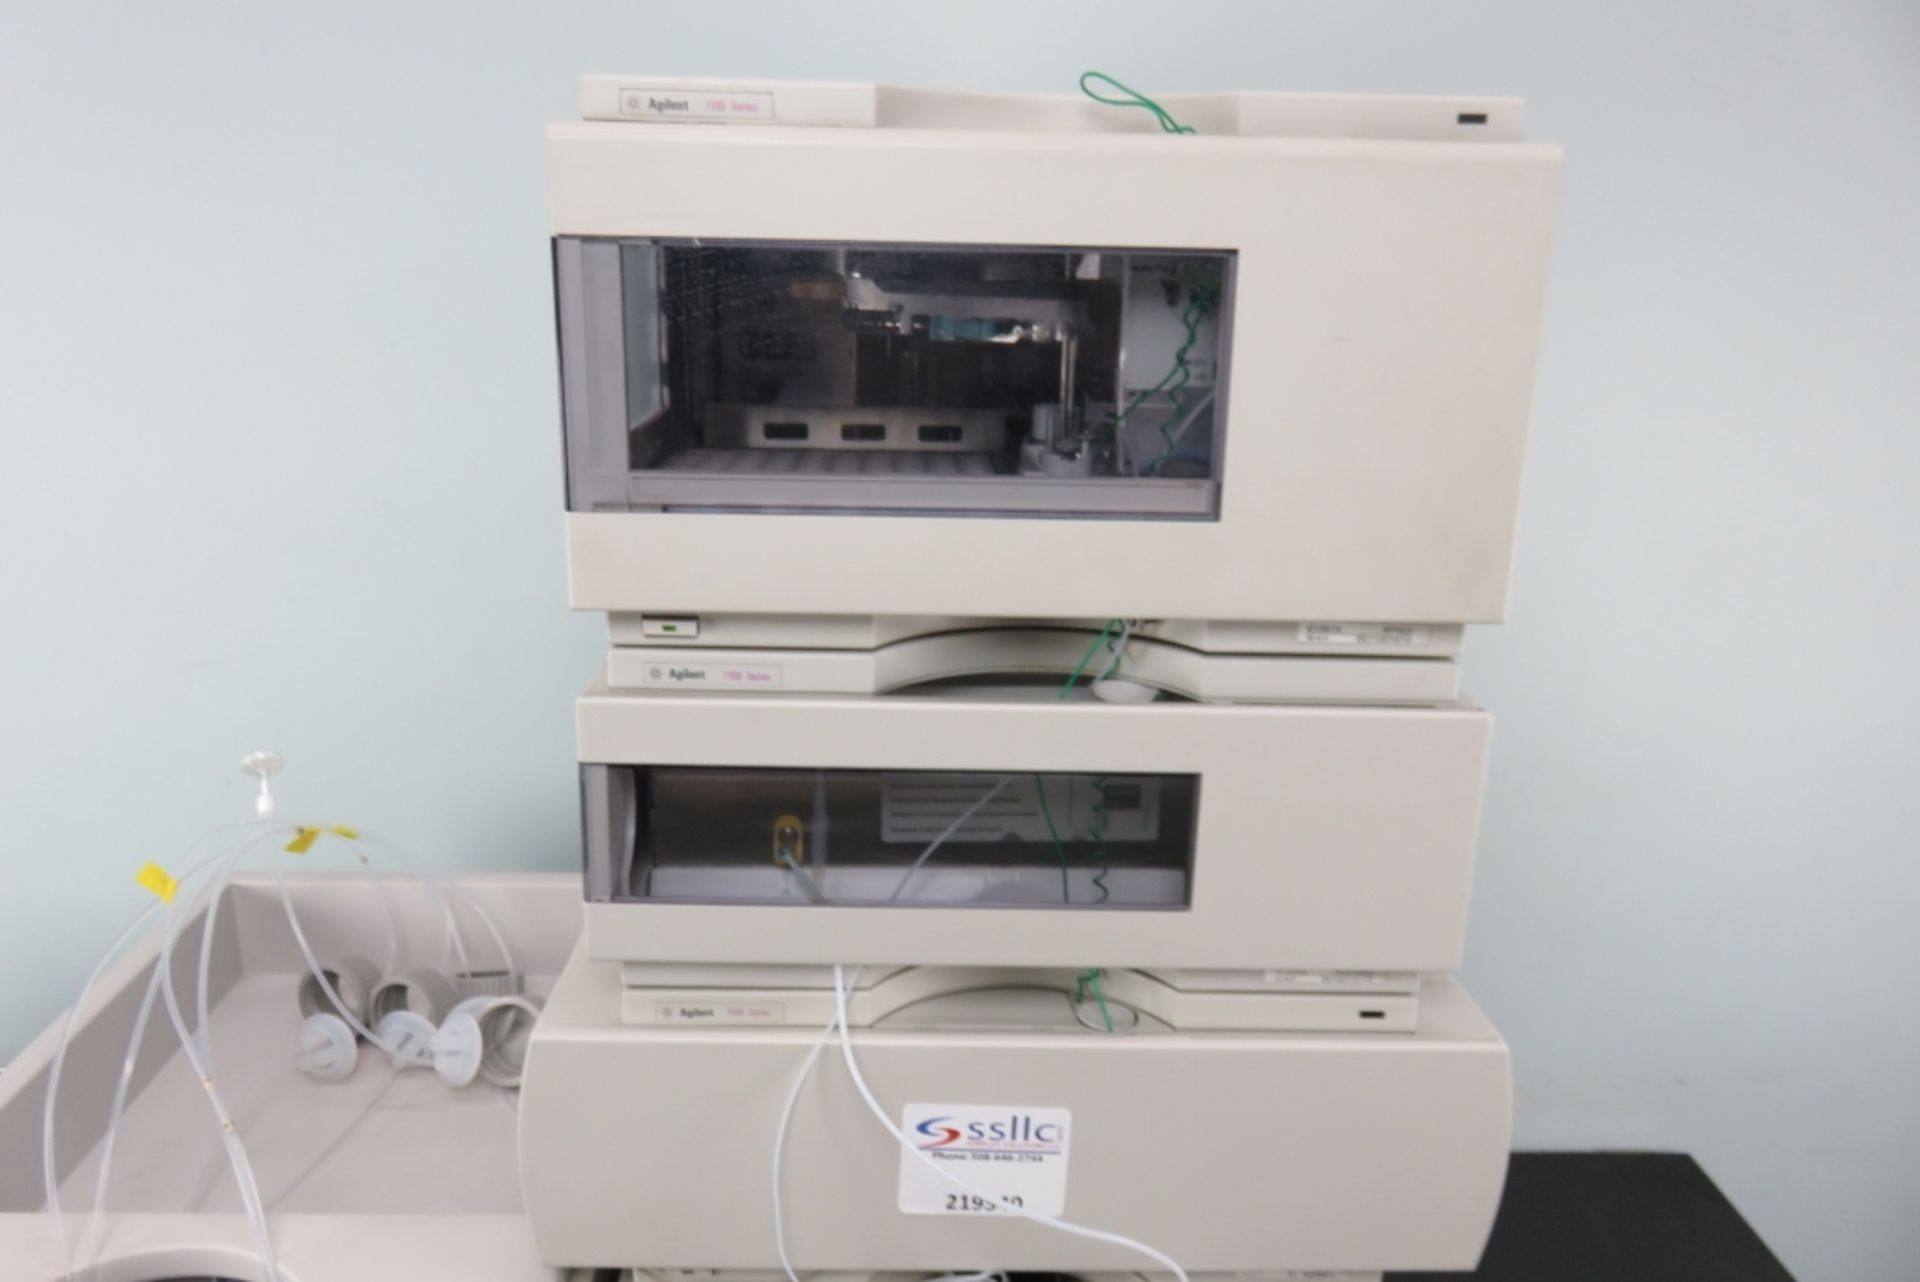 Agilent 1100 HPLC System with DAD Detector - Image 2 of 16